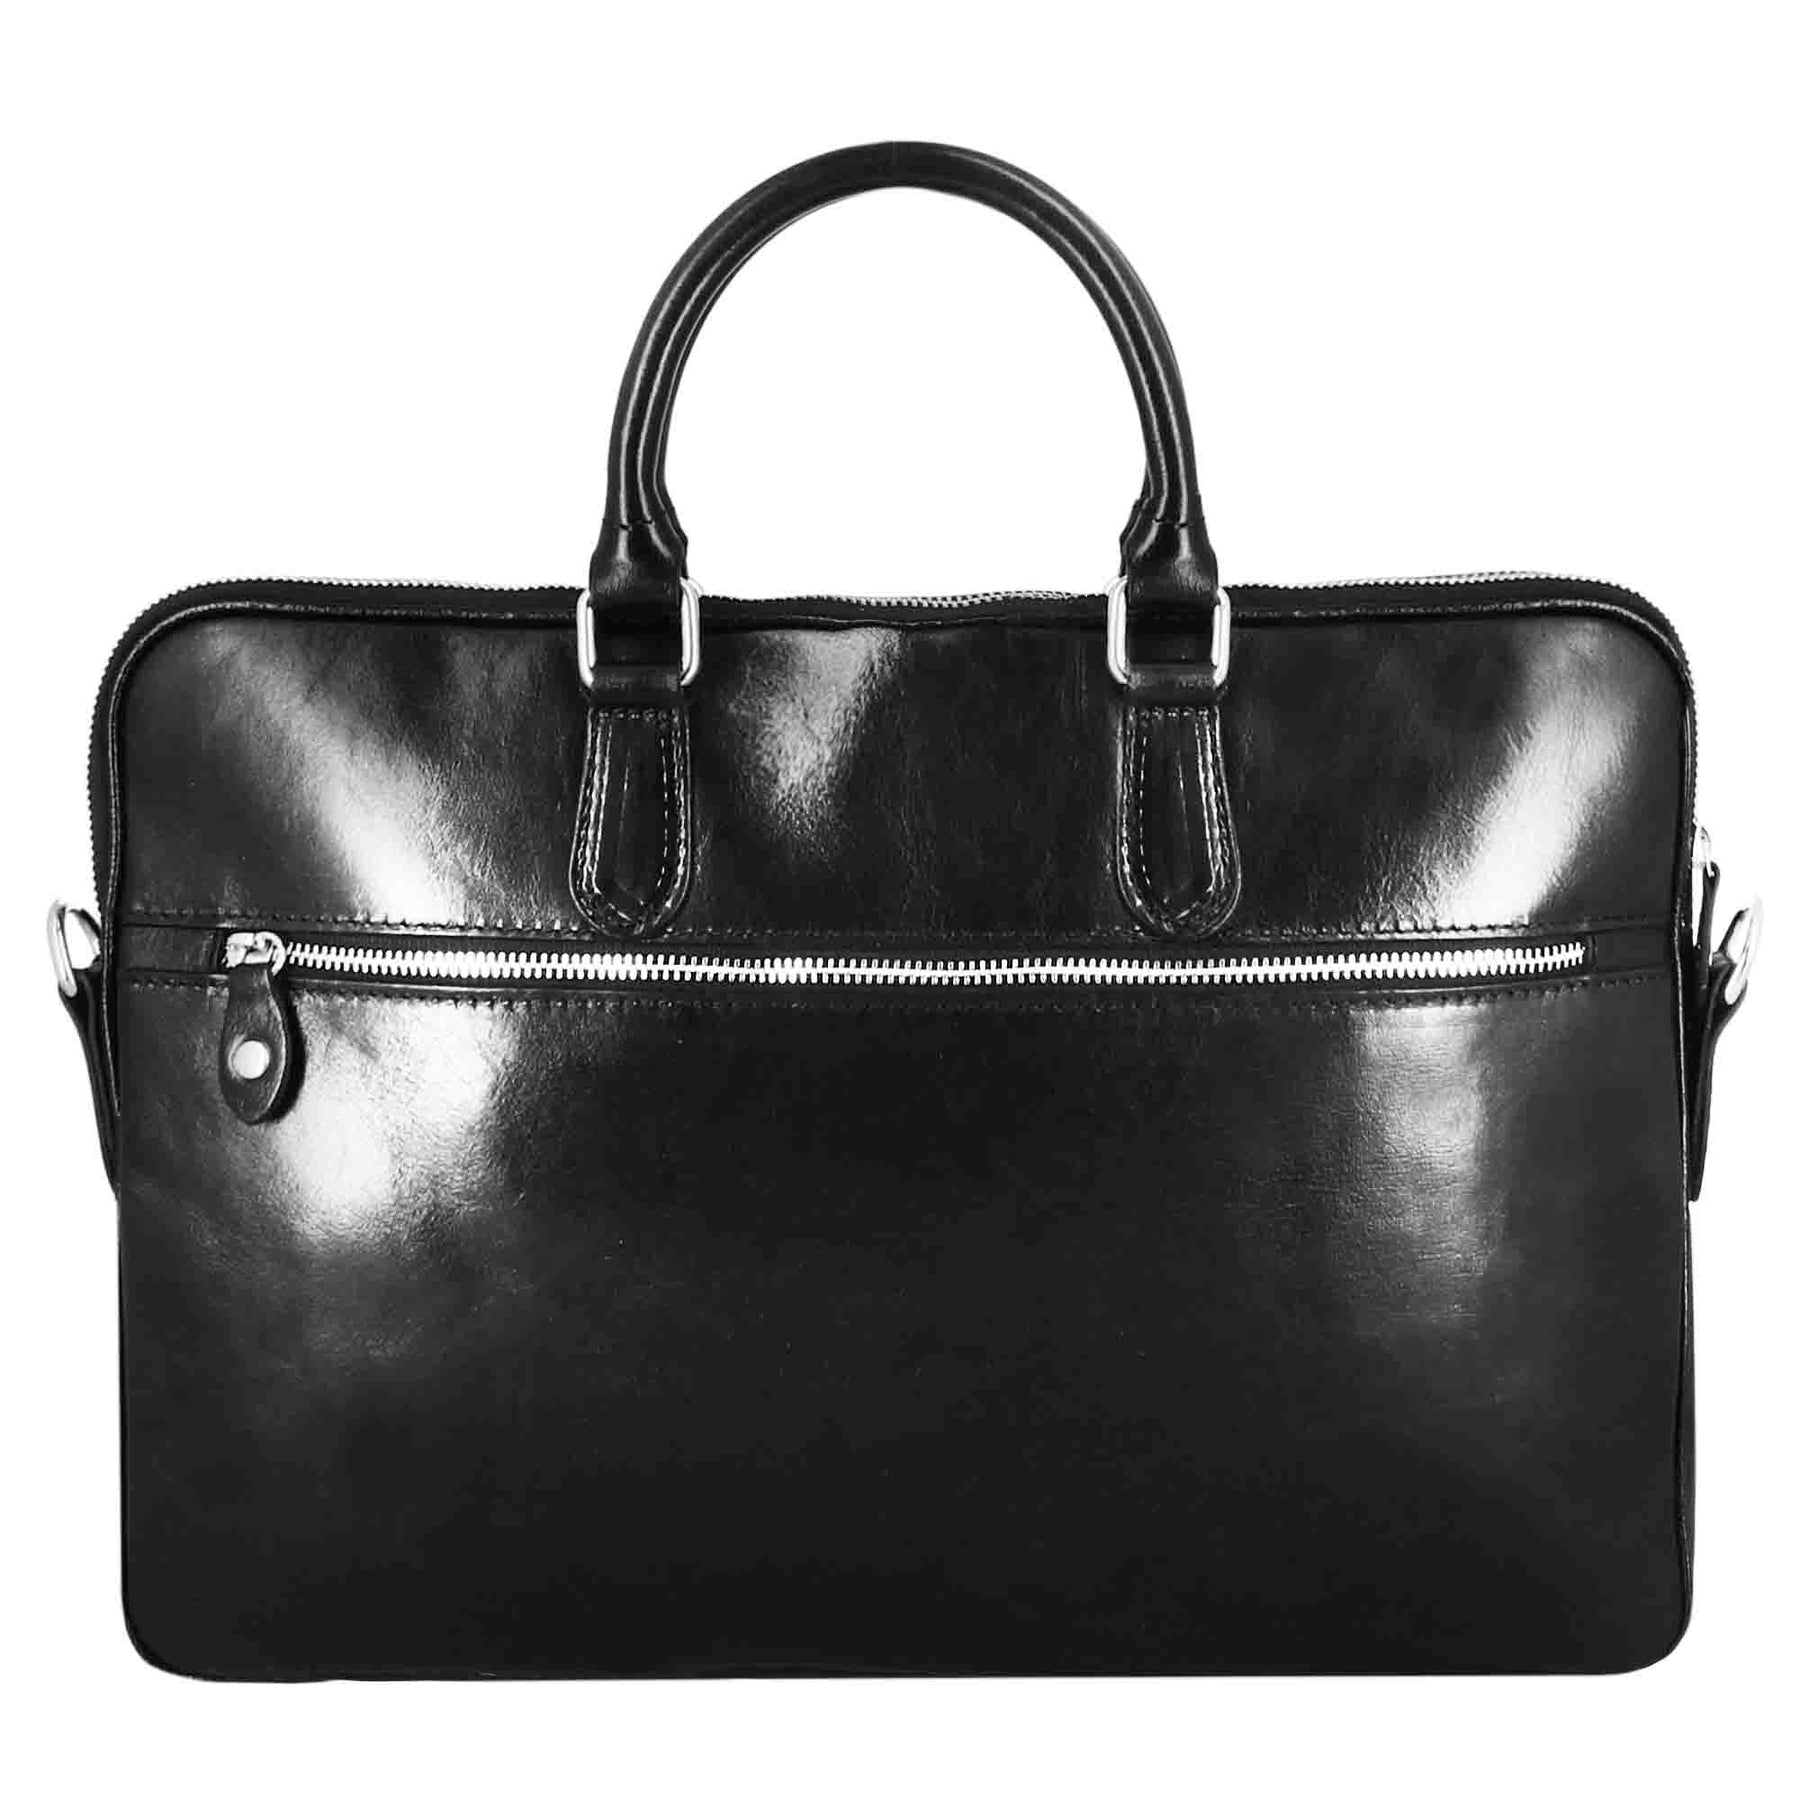 Professional leather briefcase with removable black shoulder strap